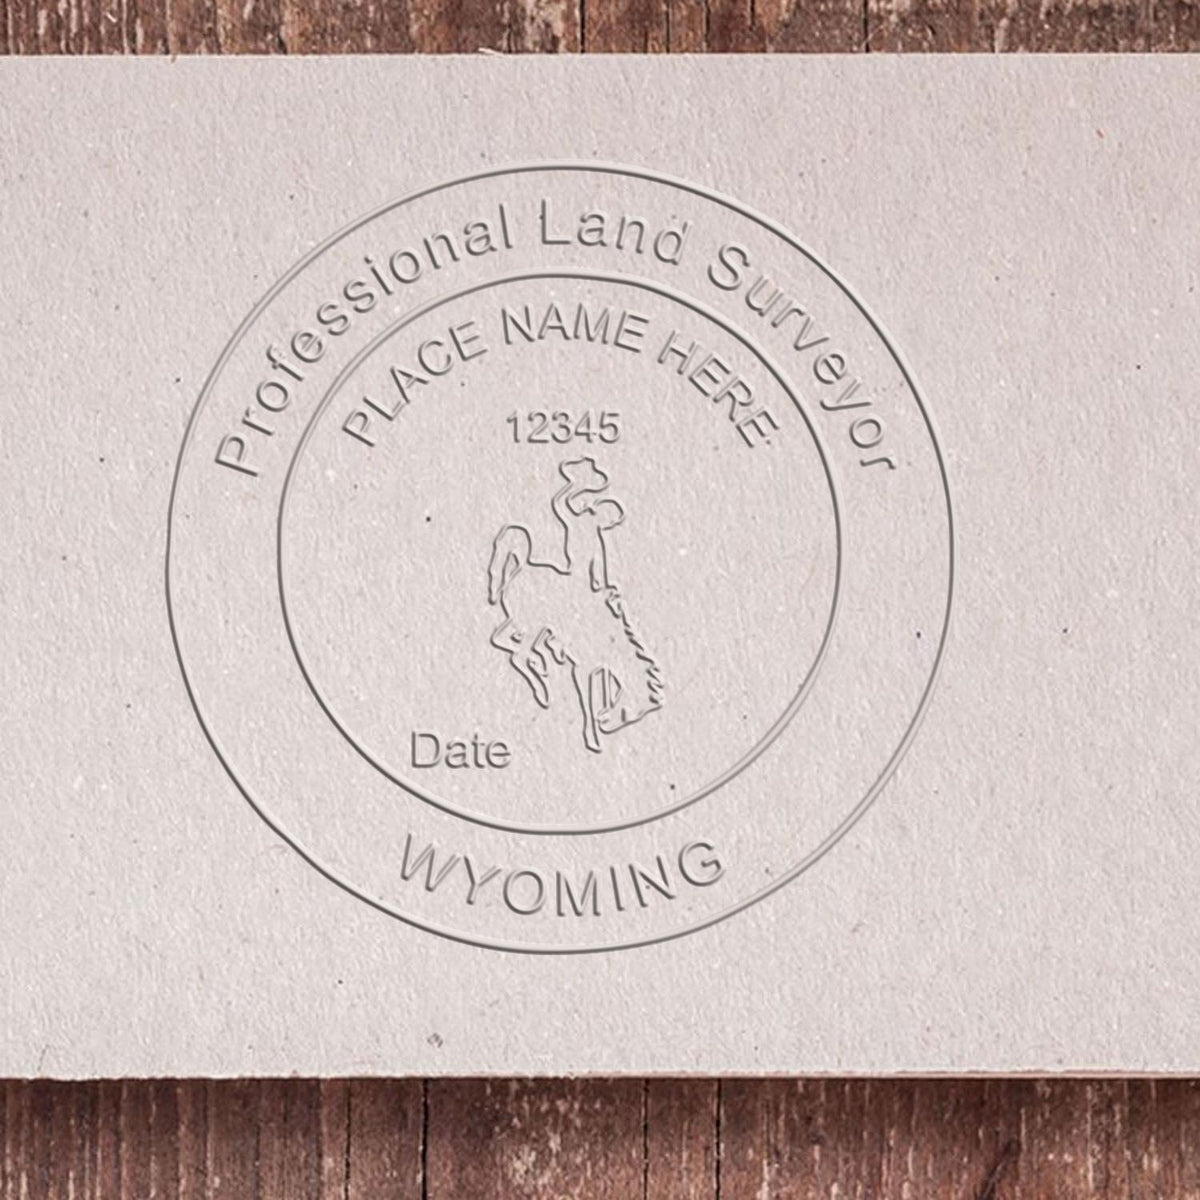 A photograph of the Hybrid Wyoming Land Surveyor Seal stamp impression reveals a vivid, professional image of the on paper.